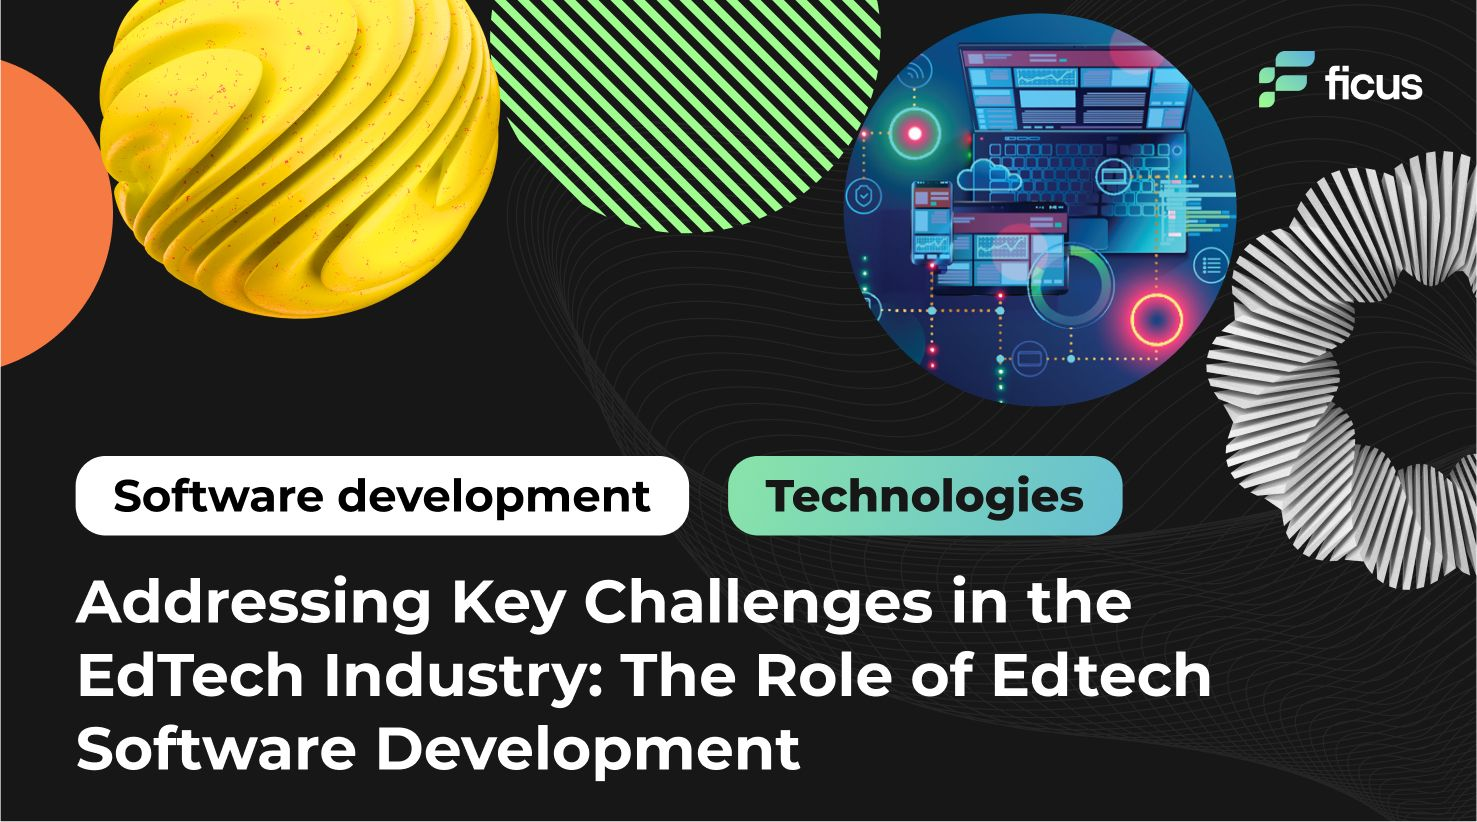 Addressing Key Challenges in the EdTech Industry: The Role of Edtech Software Development